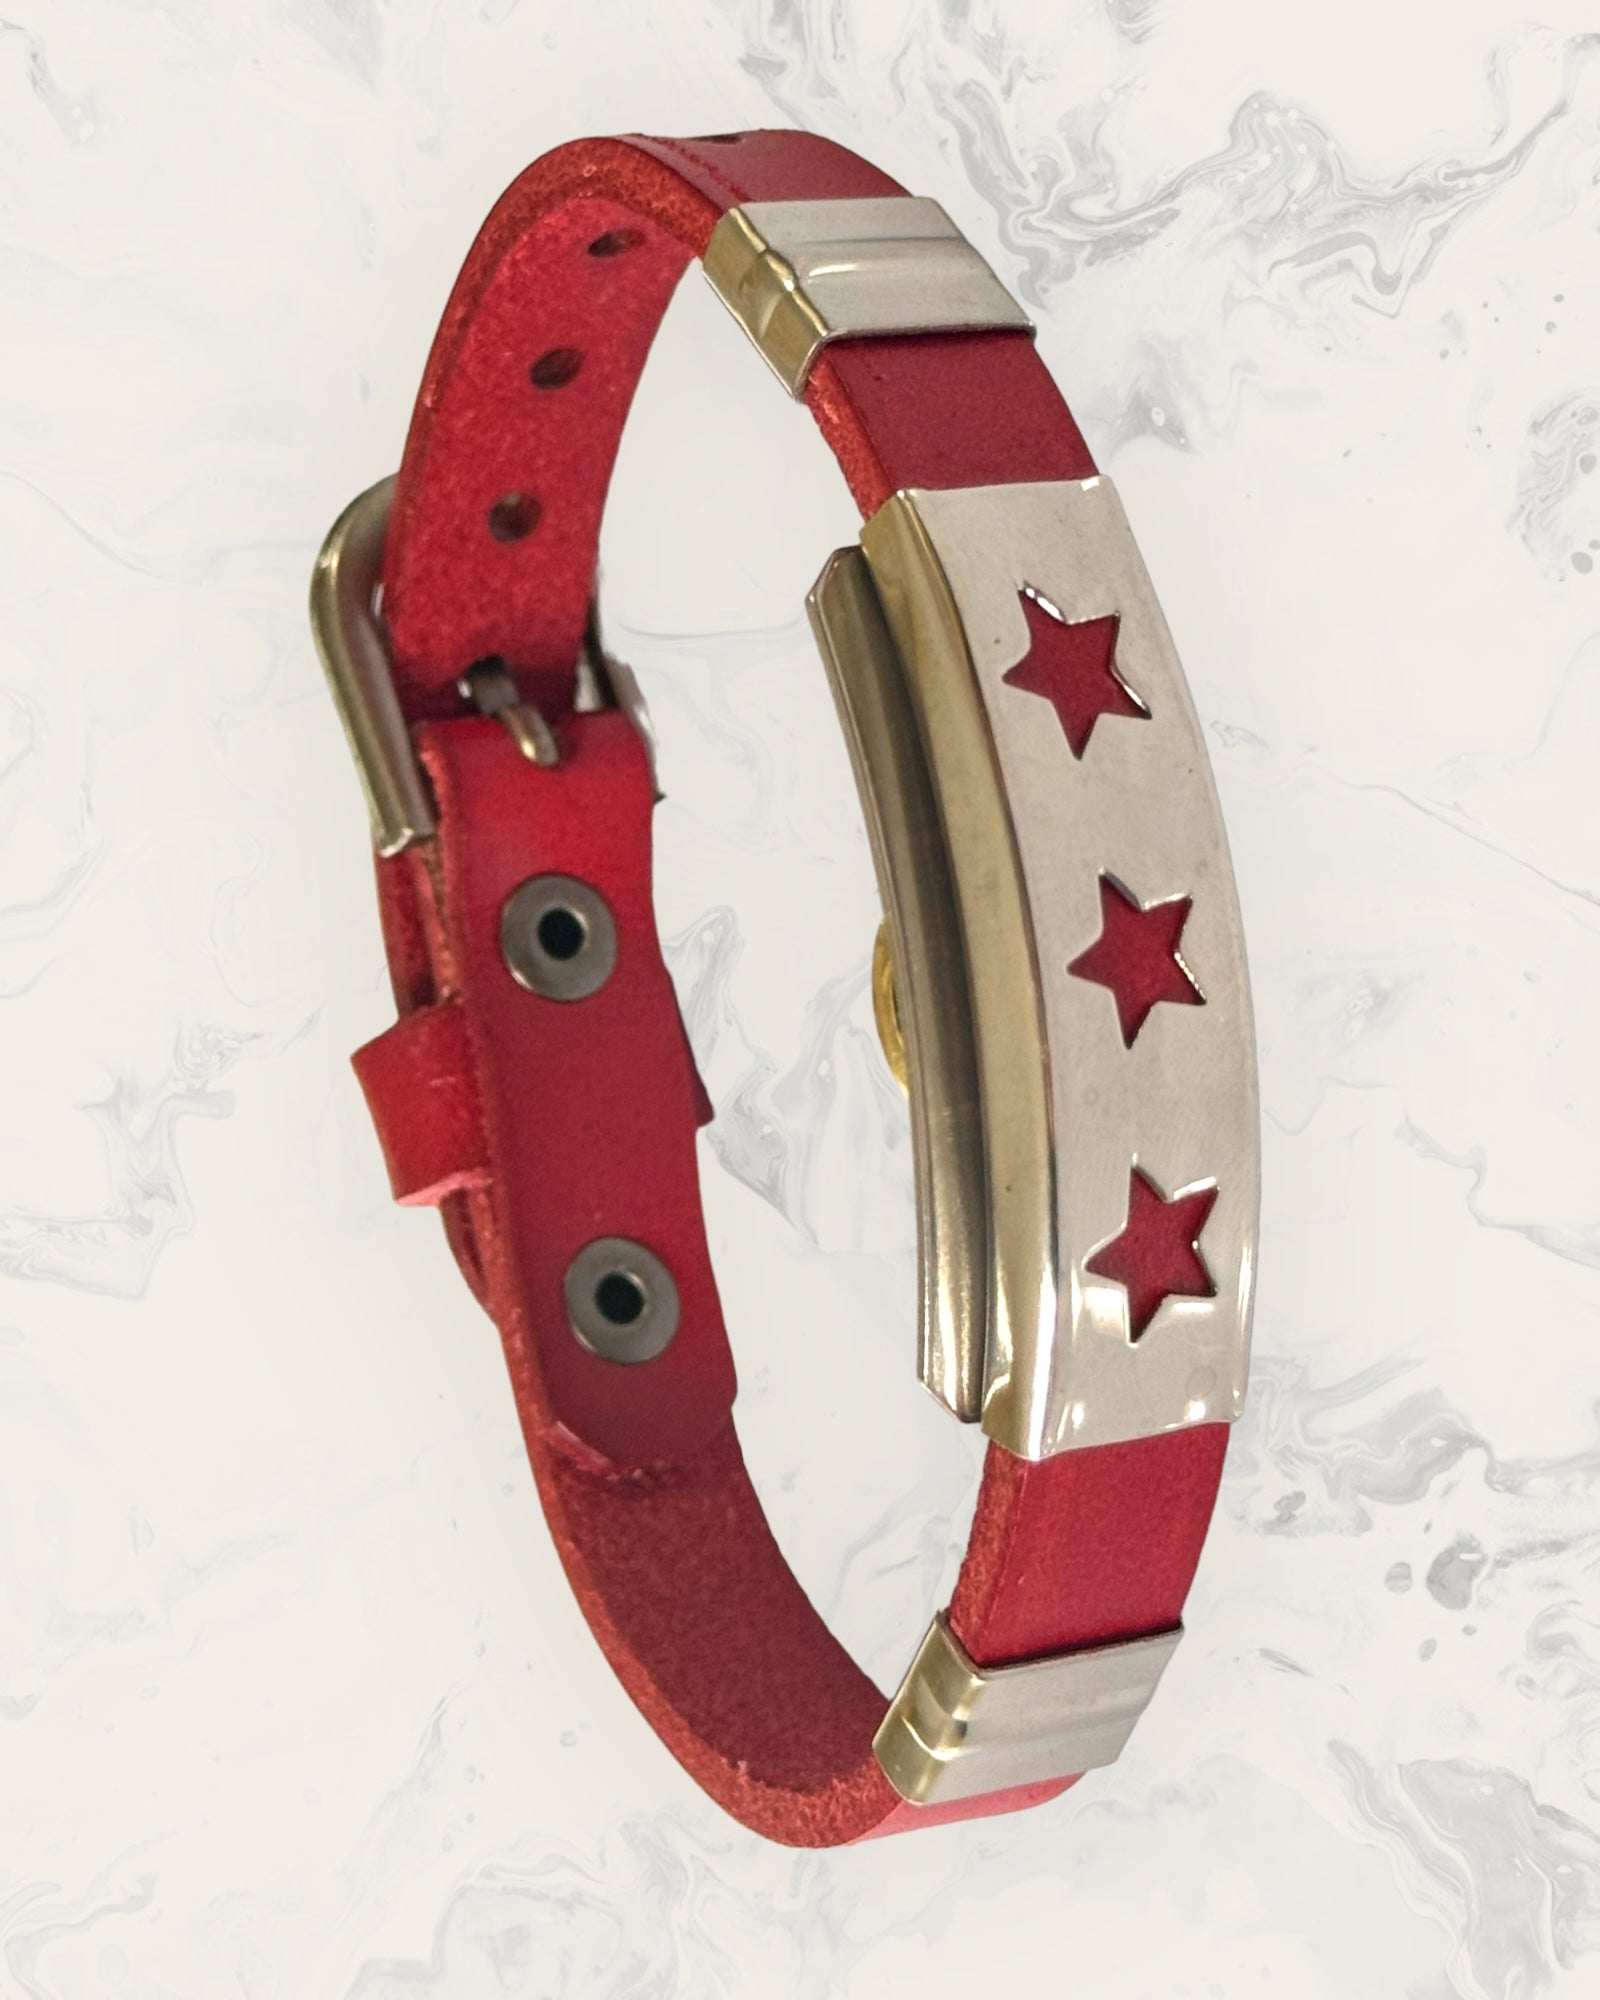 Frequency Jewelry Natural Pain Relief and EMF Protection Bracelet Leather Band Color Red with a Star design on a silver metal slider